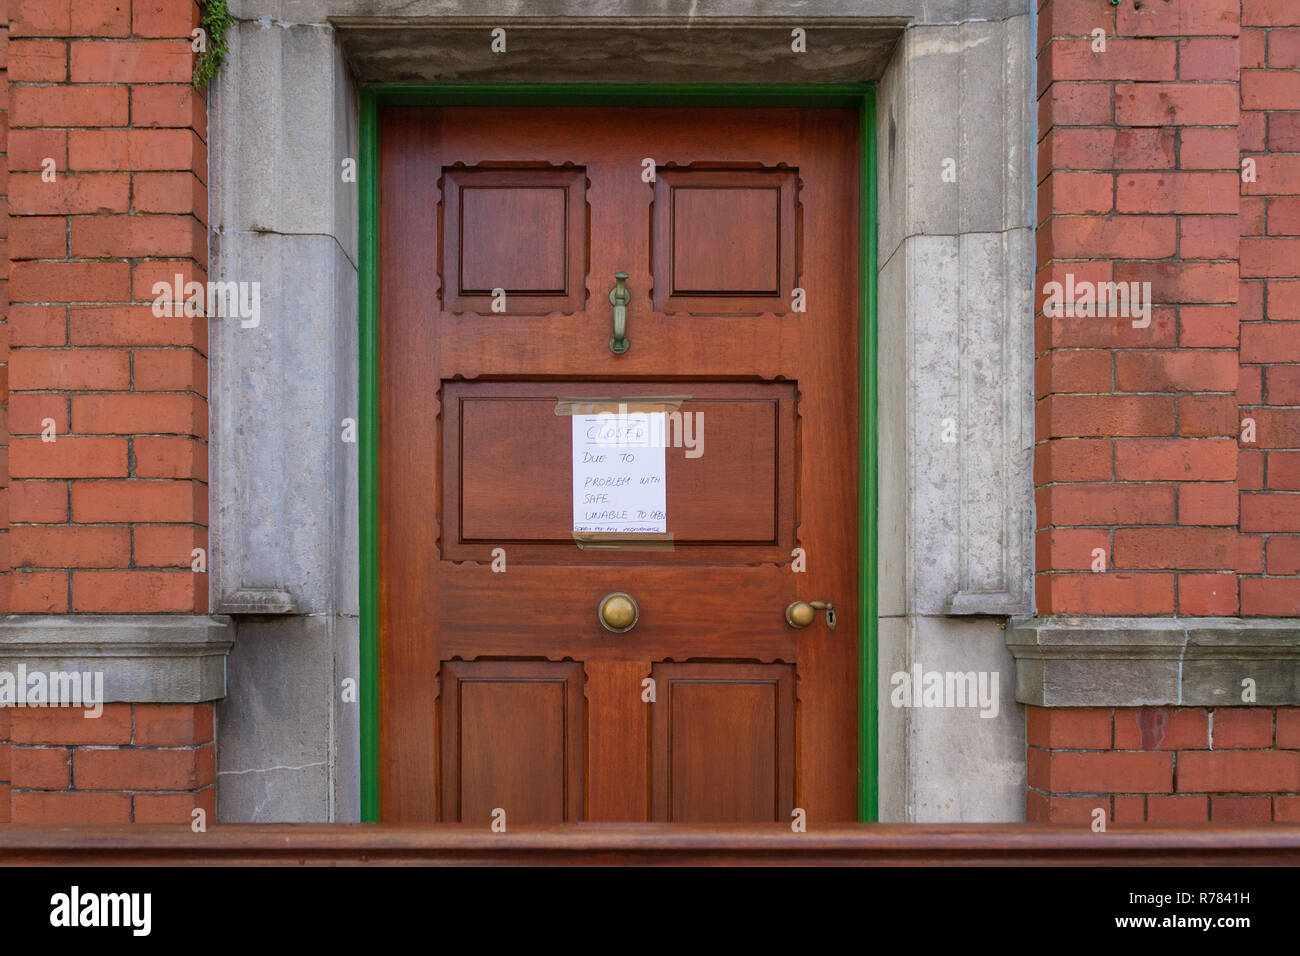 Bank Door with blue on white closed sign due to faulty safe. Stock Photo